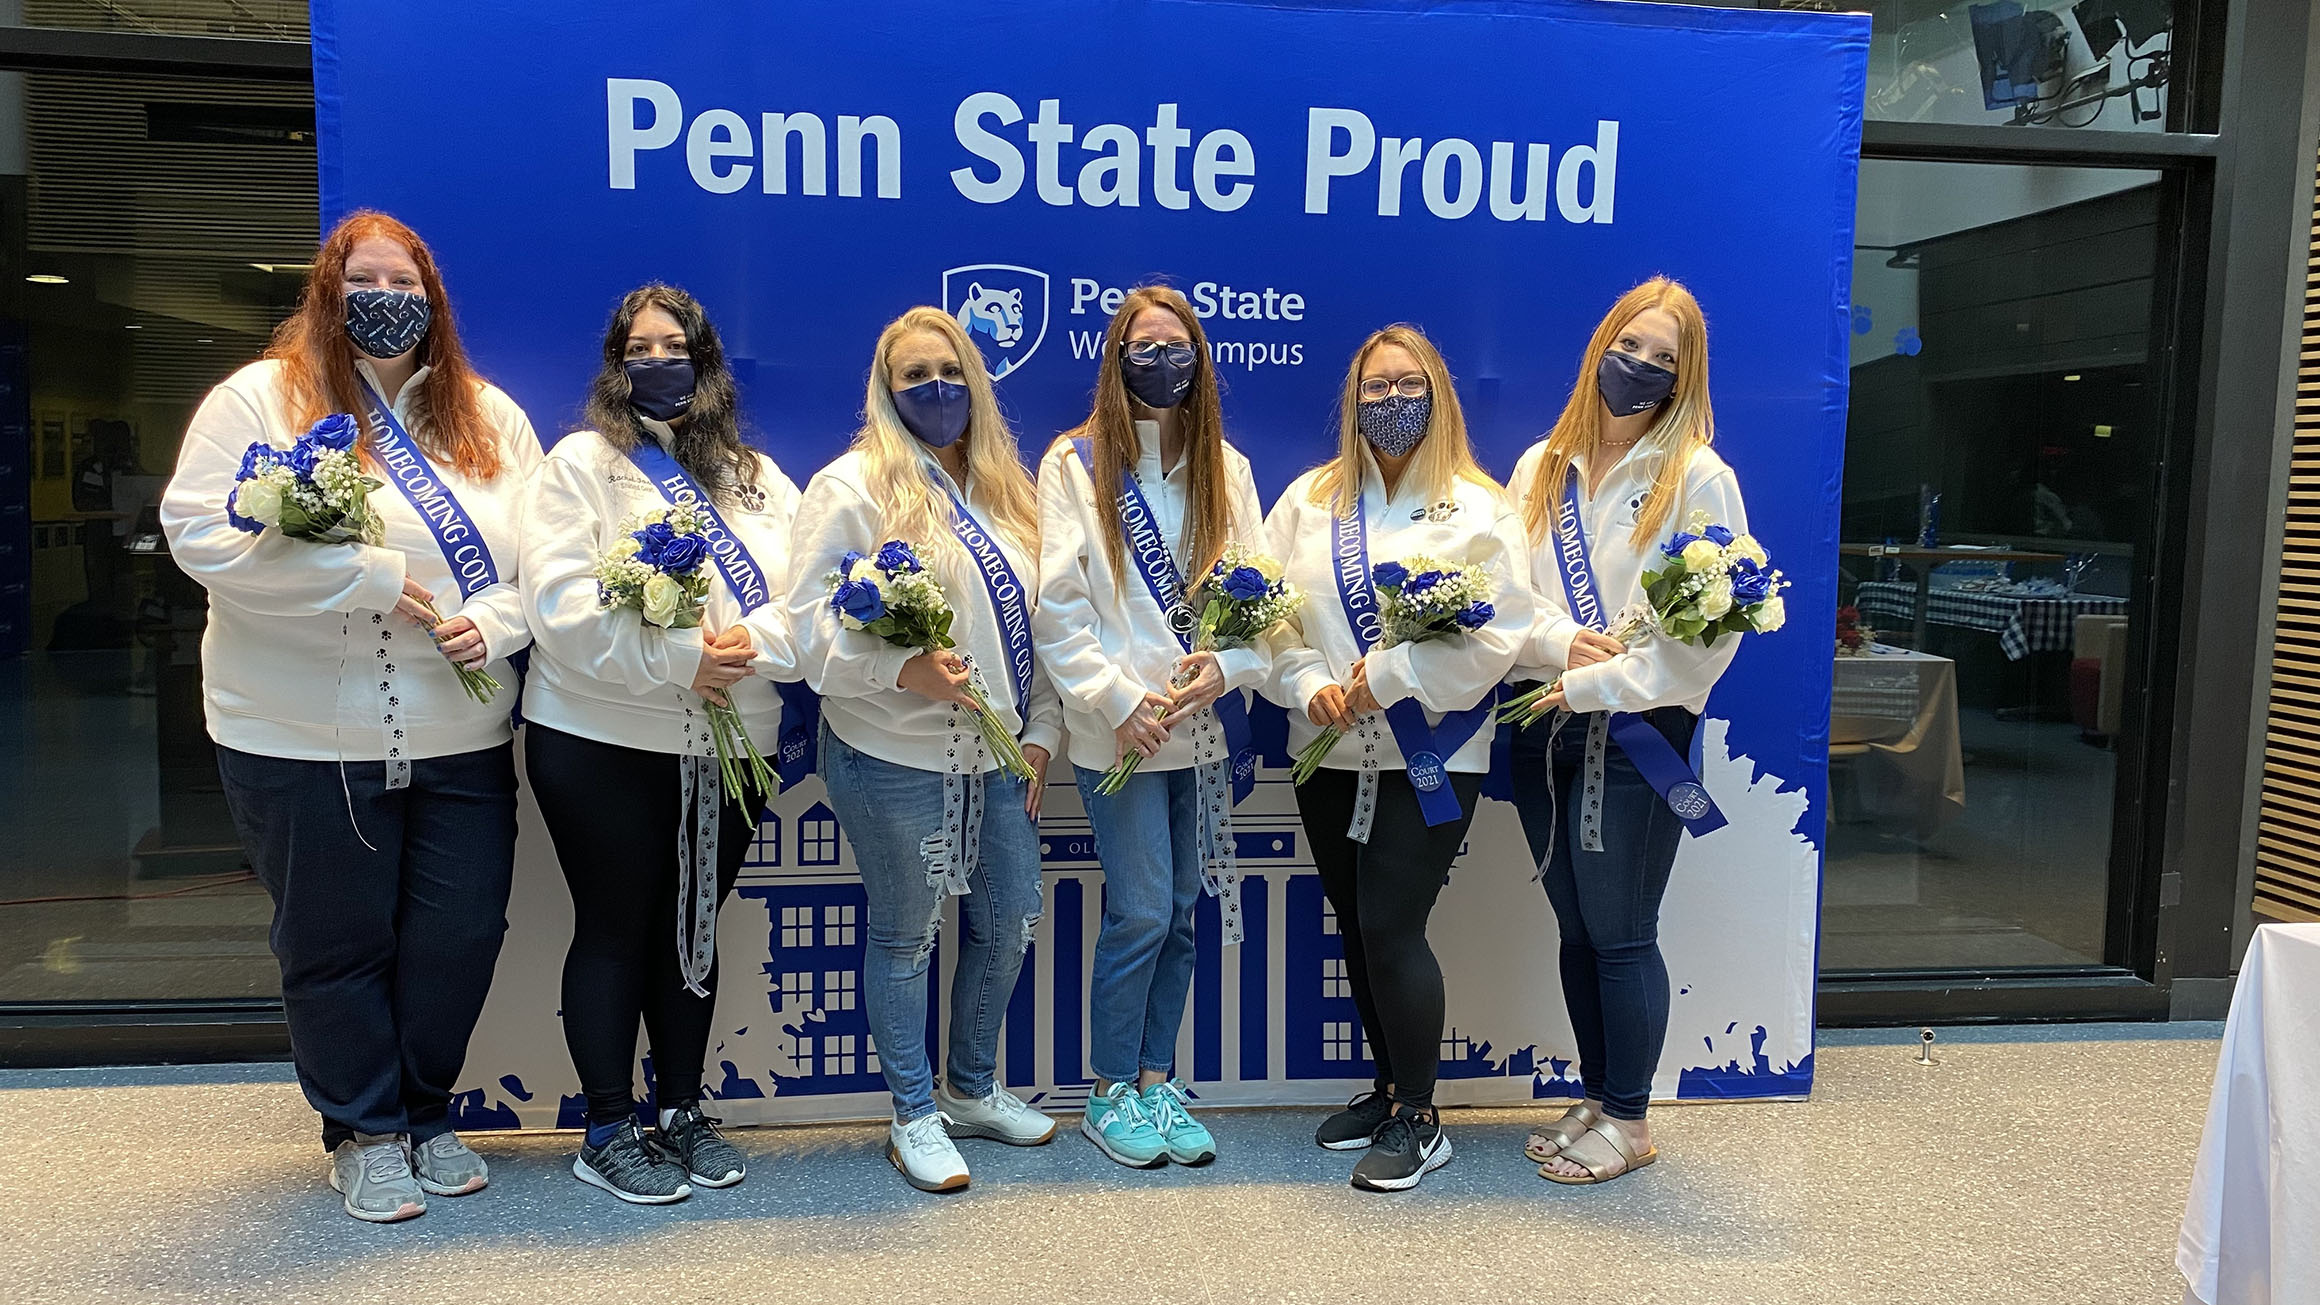 The five members of the Penn State Homecoming Court pose for a photo during the recognition ceremony.